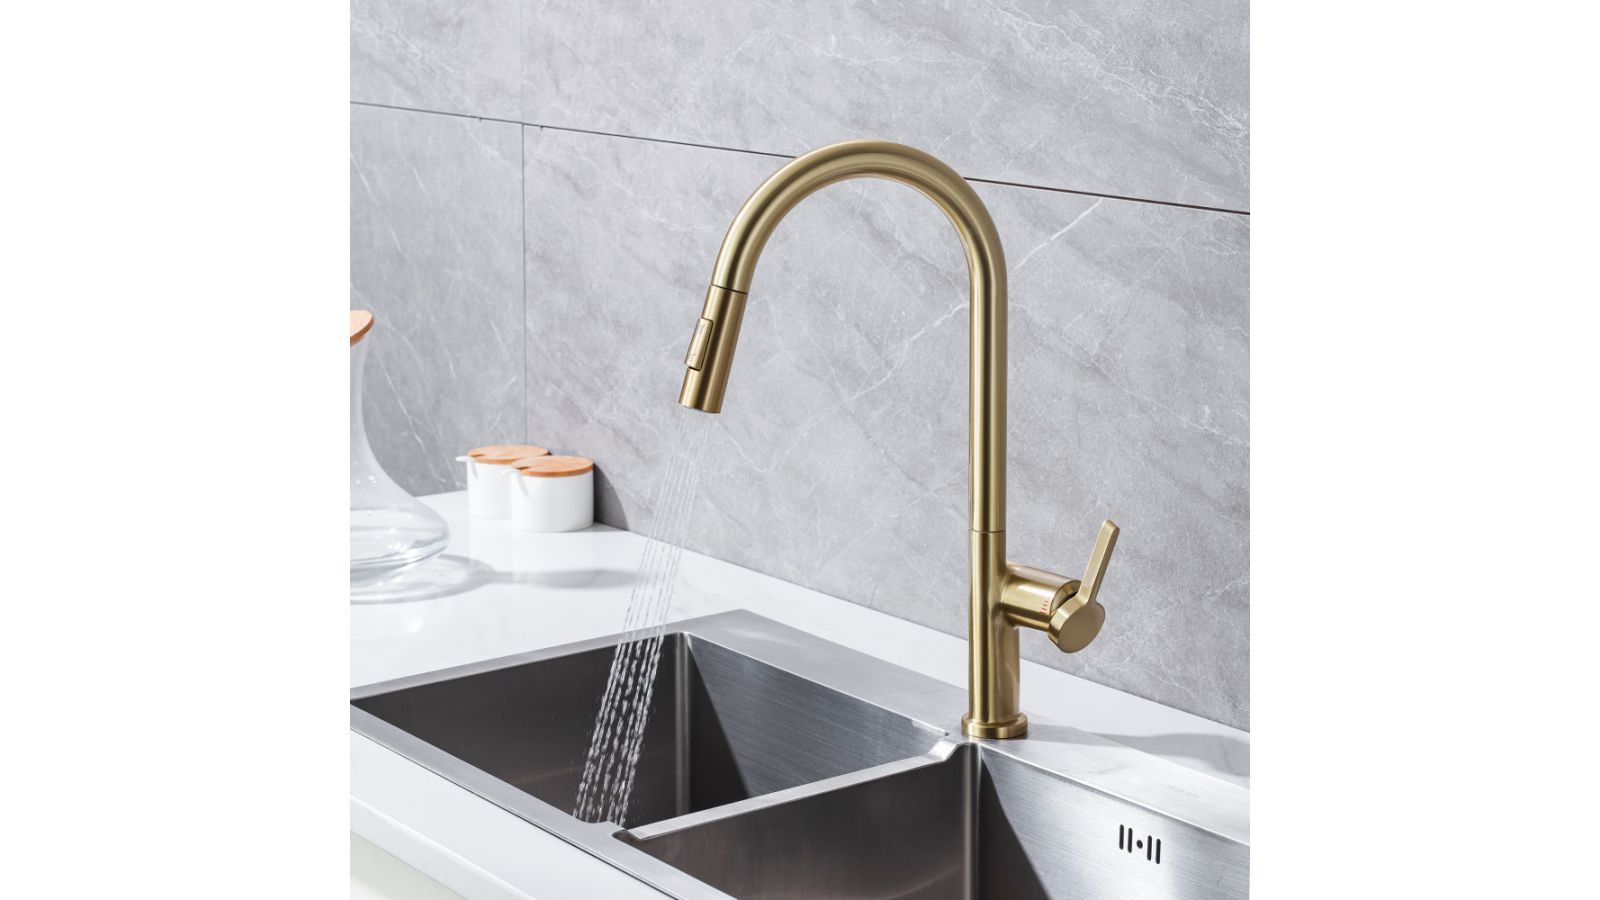 UPC pull down kitchen faucet